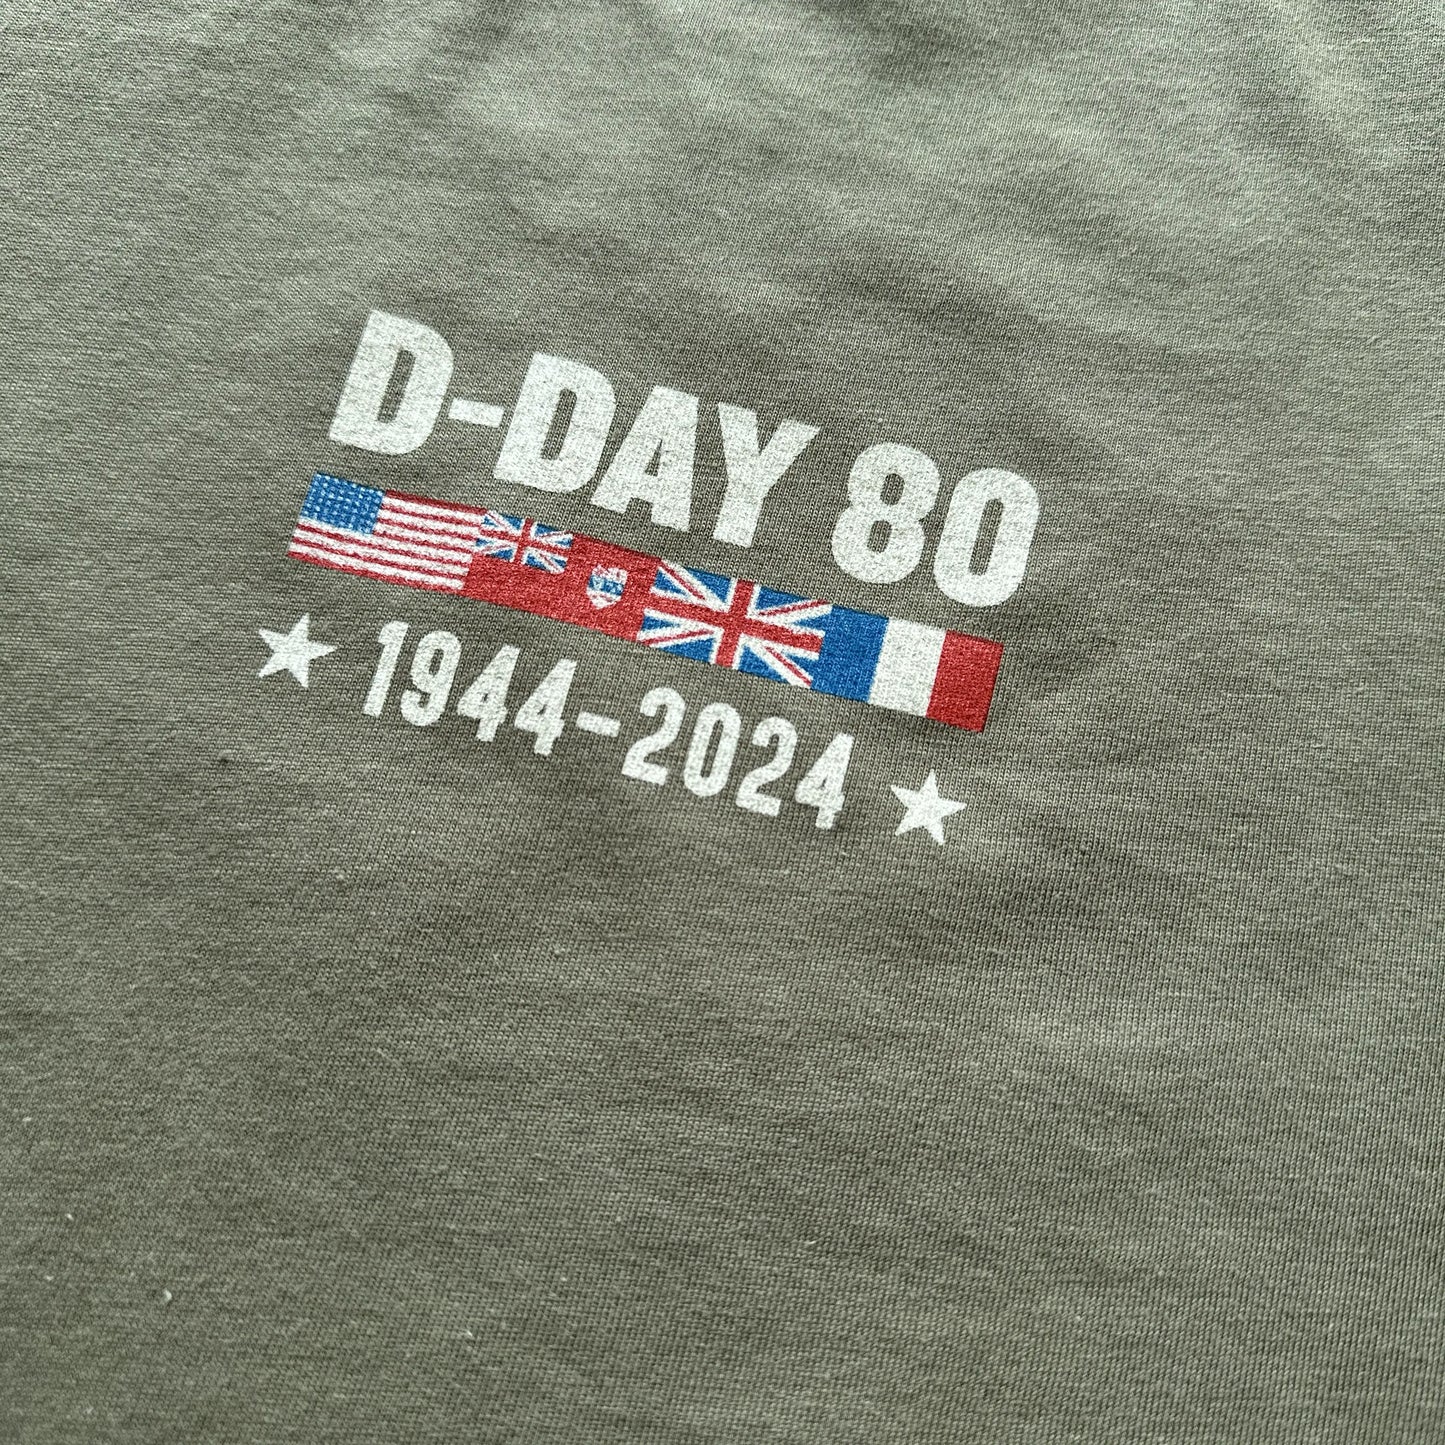 D-Day 80th Anniversary Made in America Long-sleeved shirt